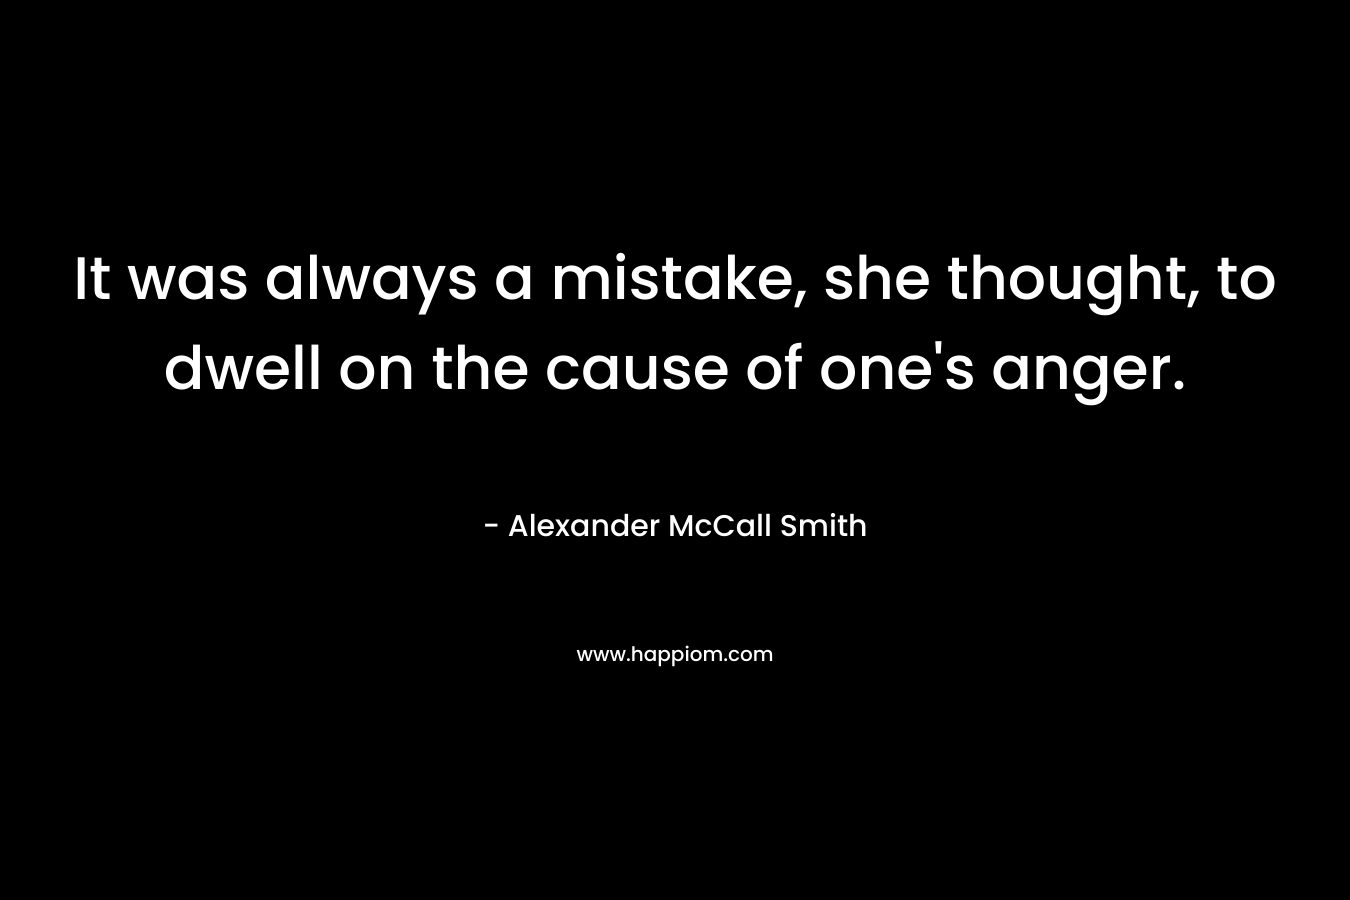 It was always a mistake, she thought, to dwell on the cause of one's anger.